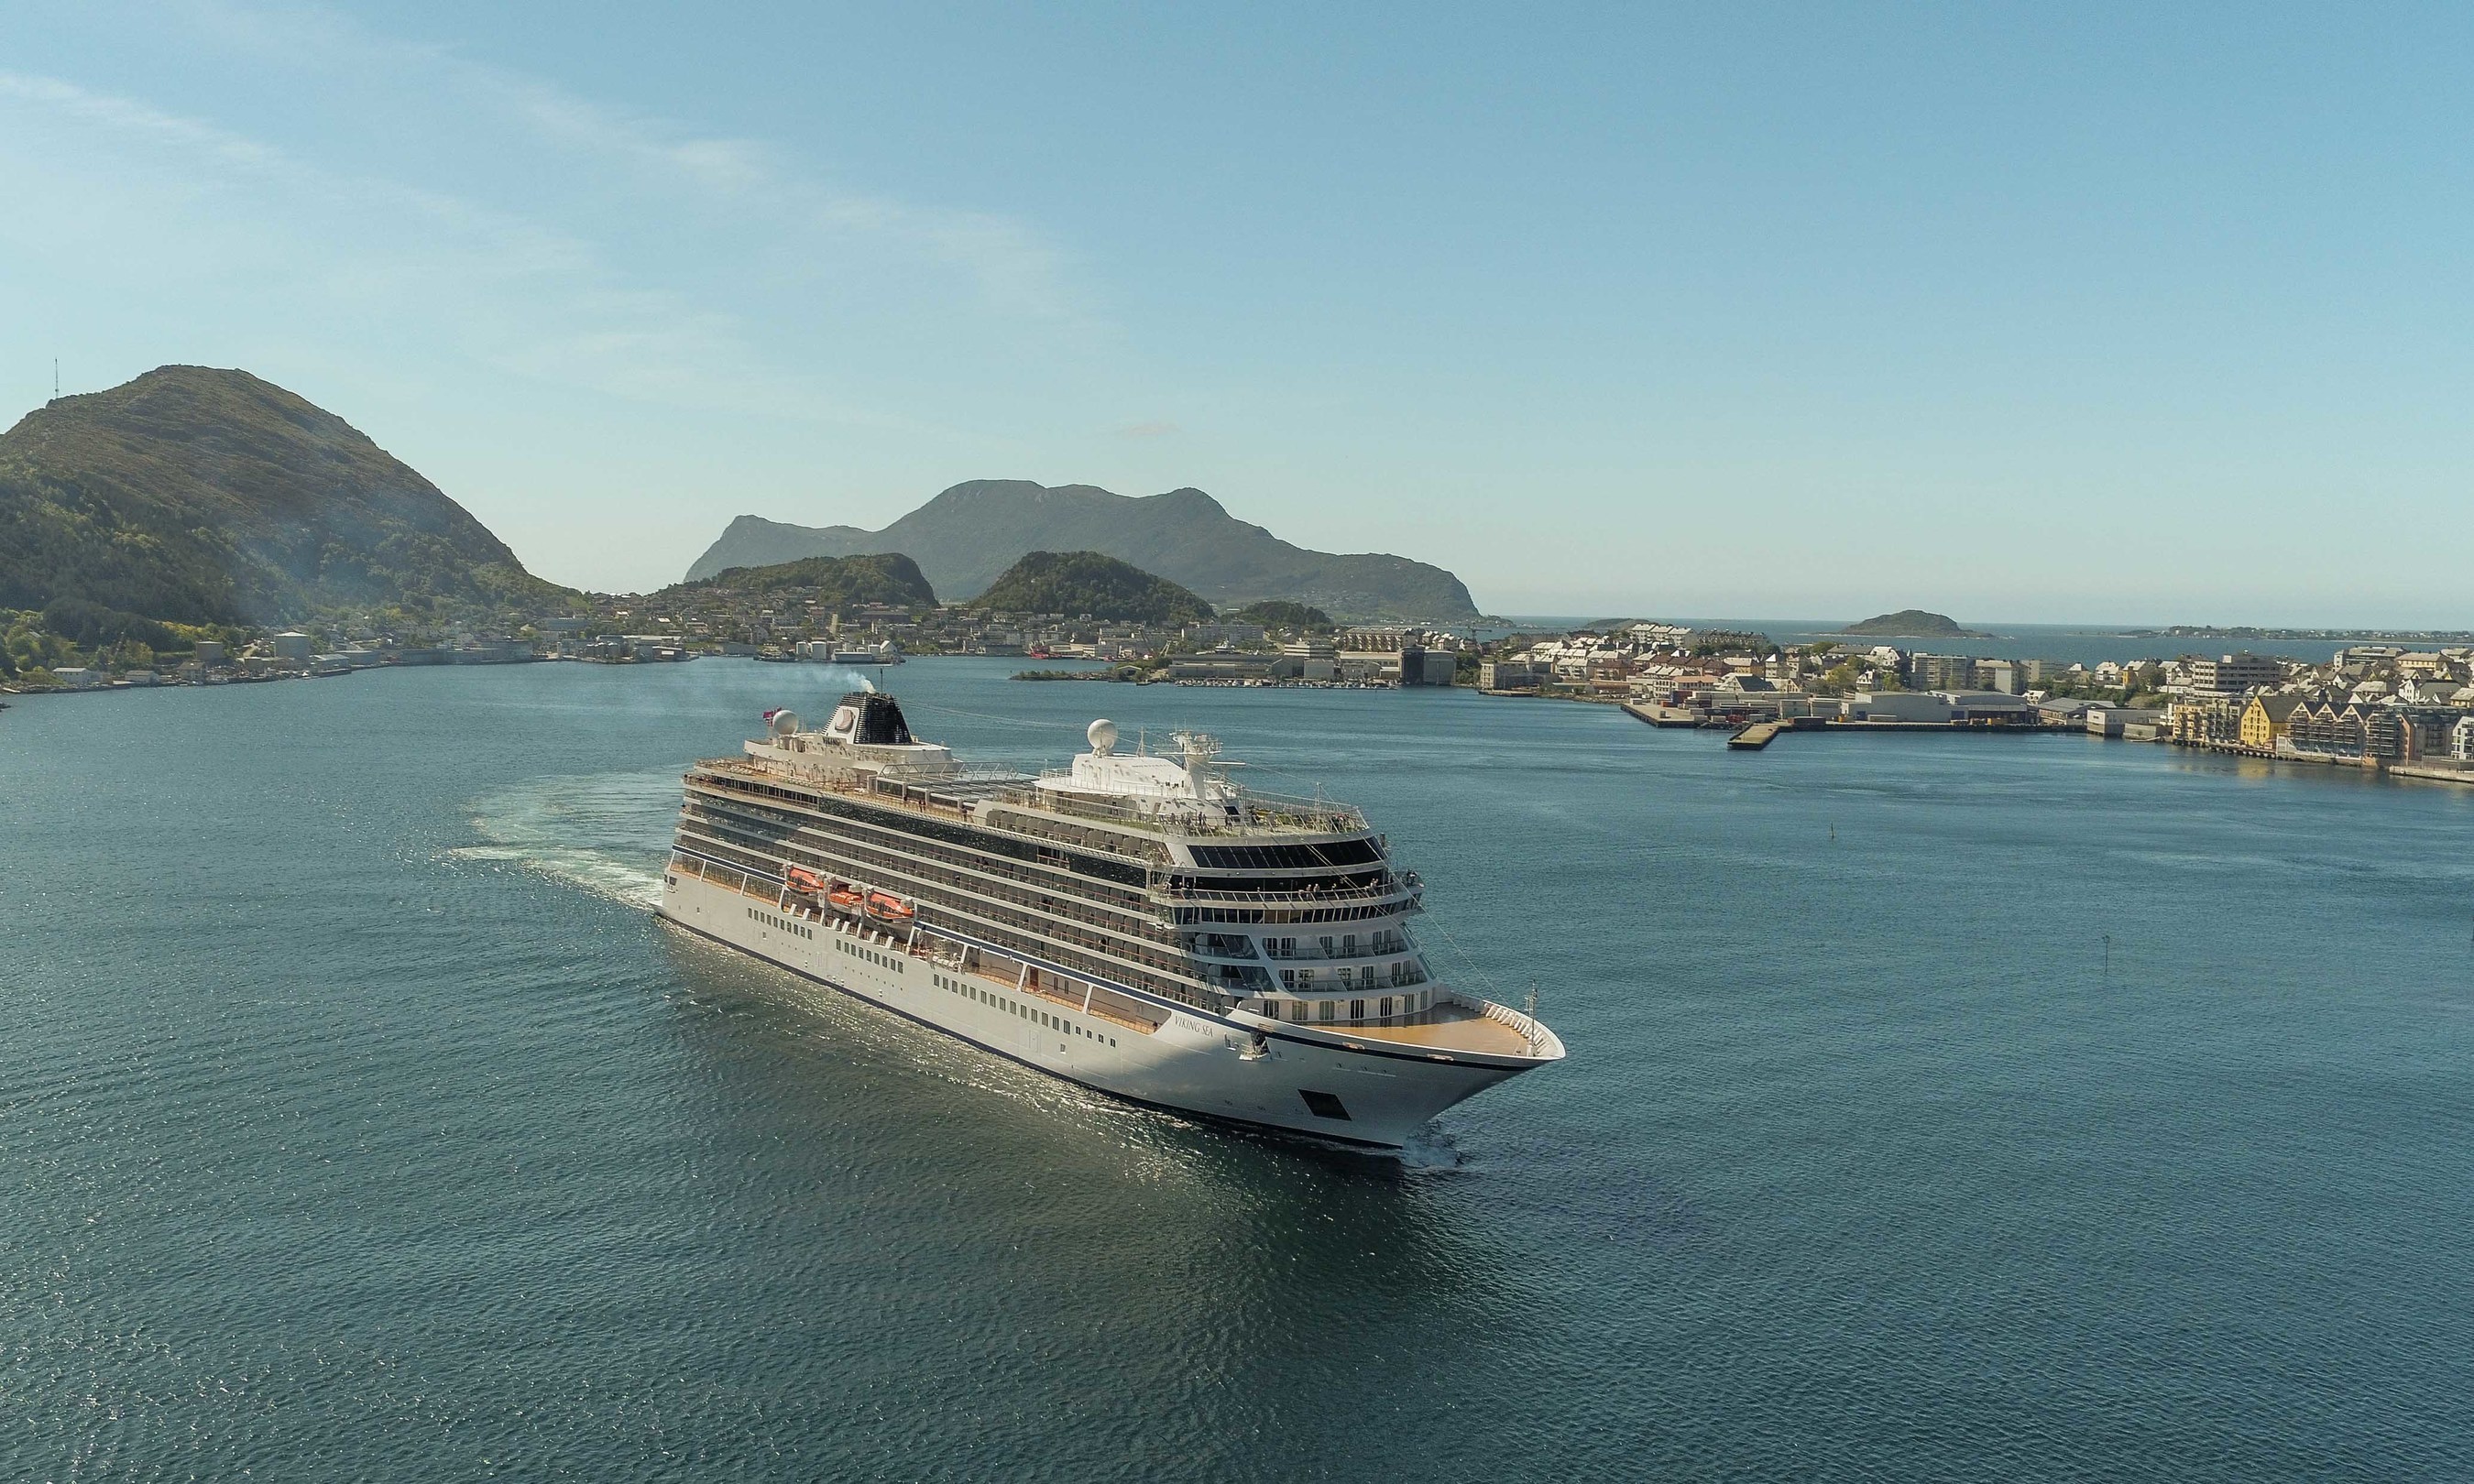 The new 930-passenger Viking Sea cruises into Alesund, Norway on the first sailing of the Viking's new "Into the Midnight Sun" itinerary that operates between London and Bergen, Norway.